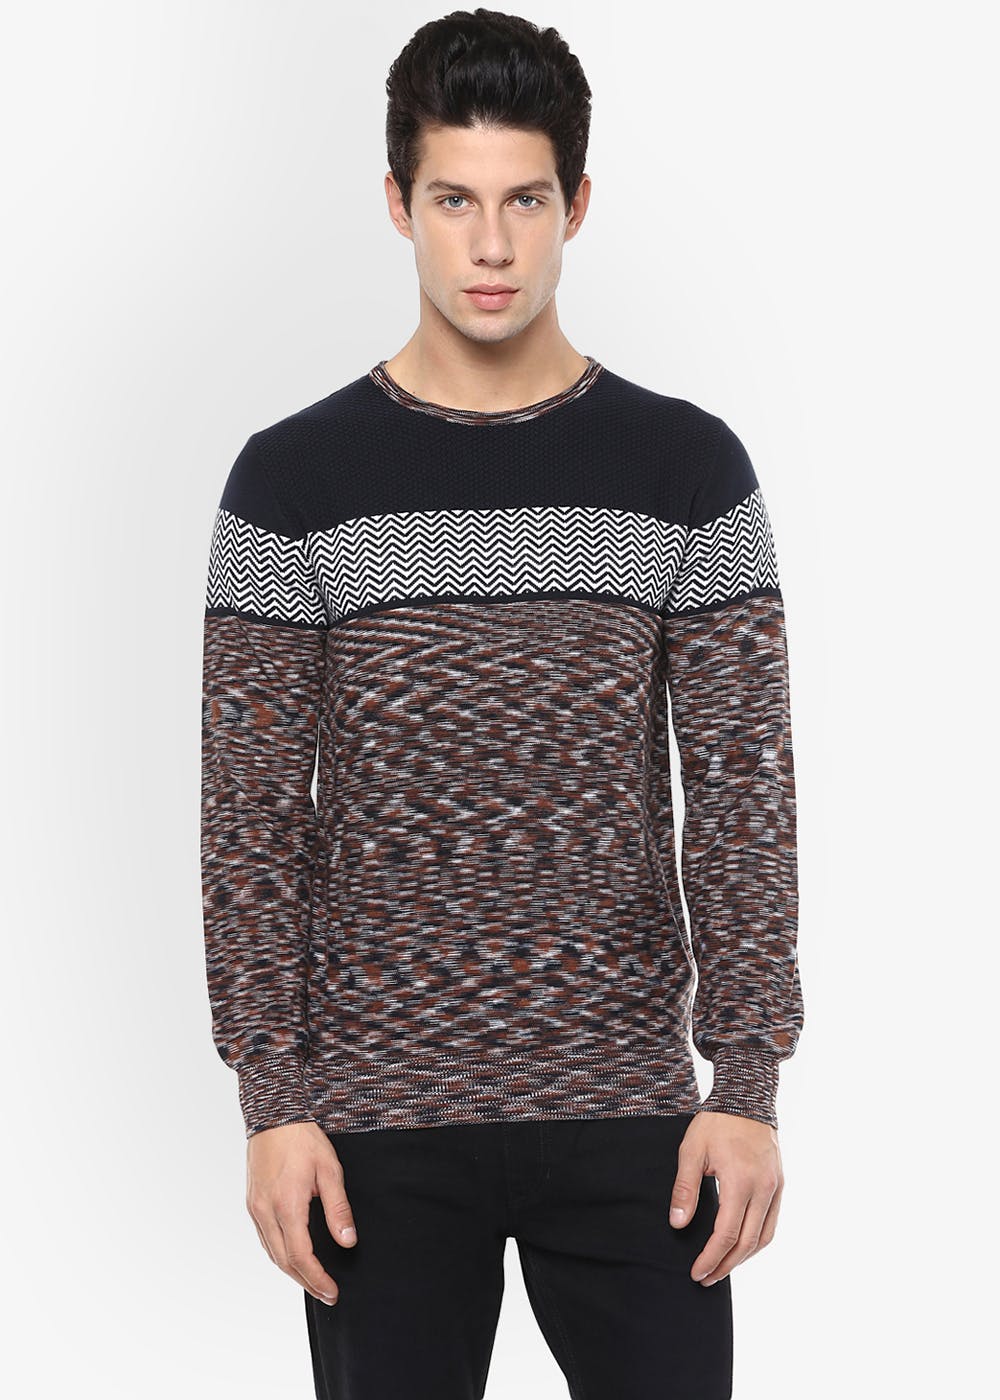 Get Multi Zig Zag Wave Pattern Pullover at ₹ 1645 | LBB Shop